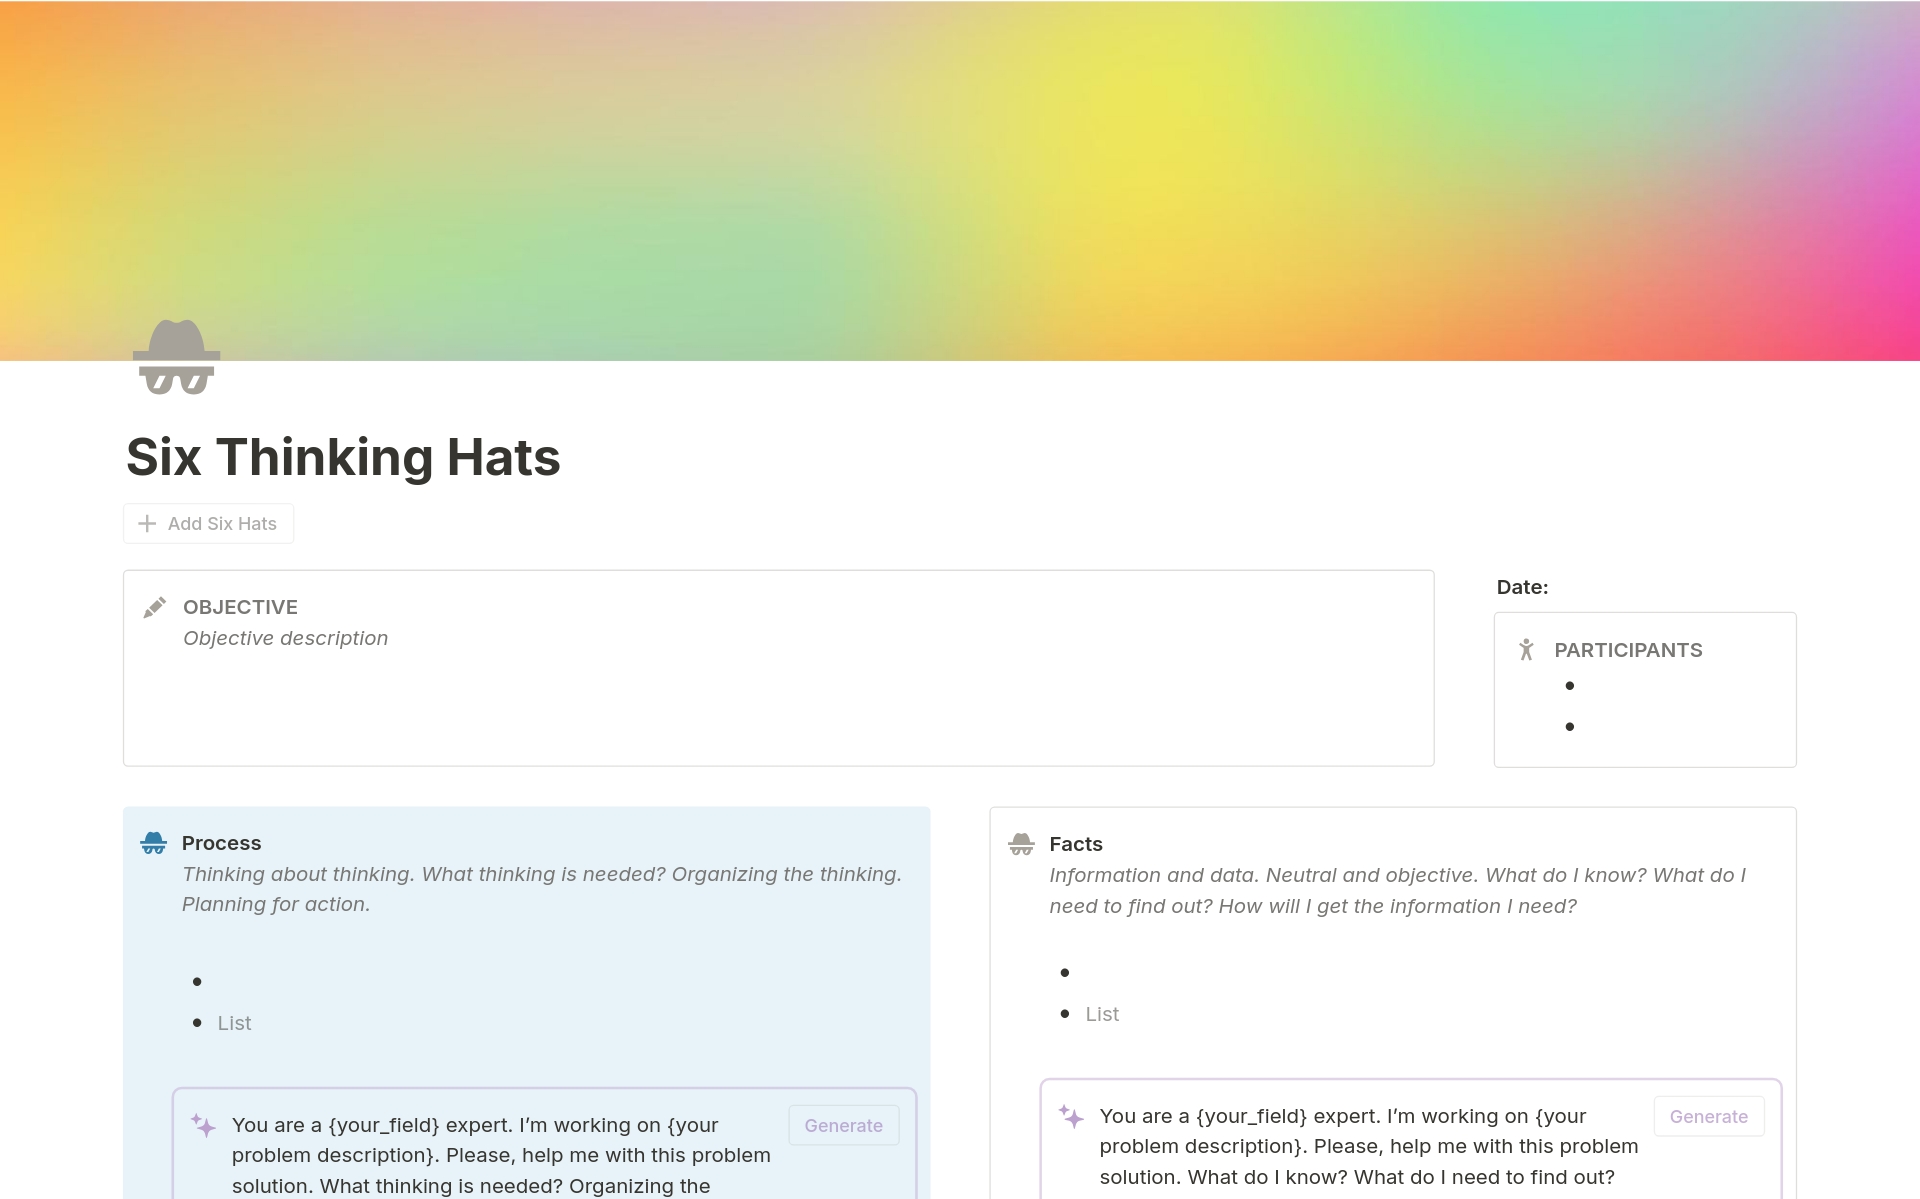 The Six Thinking Hats Notion Template, now with AI-driven insights, can help you solve problems and make better decisions.